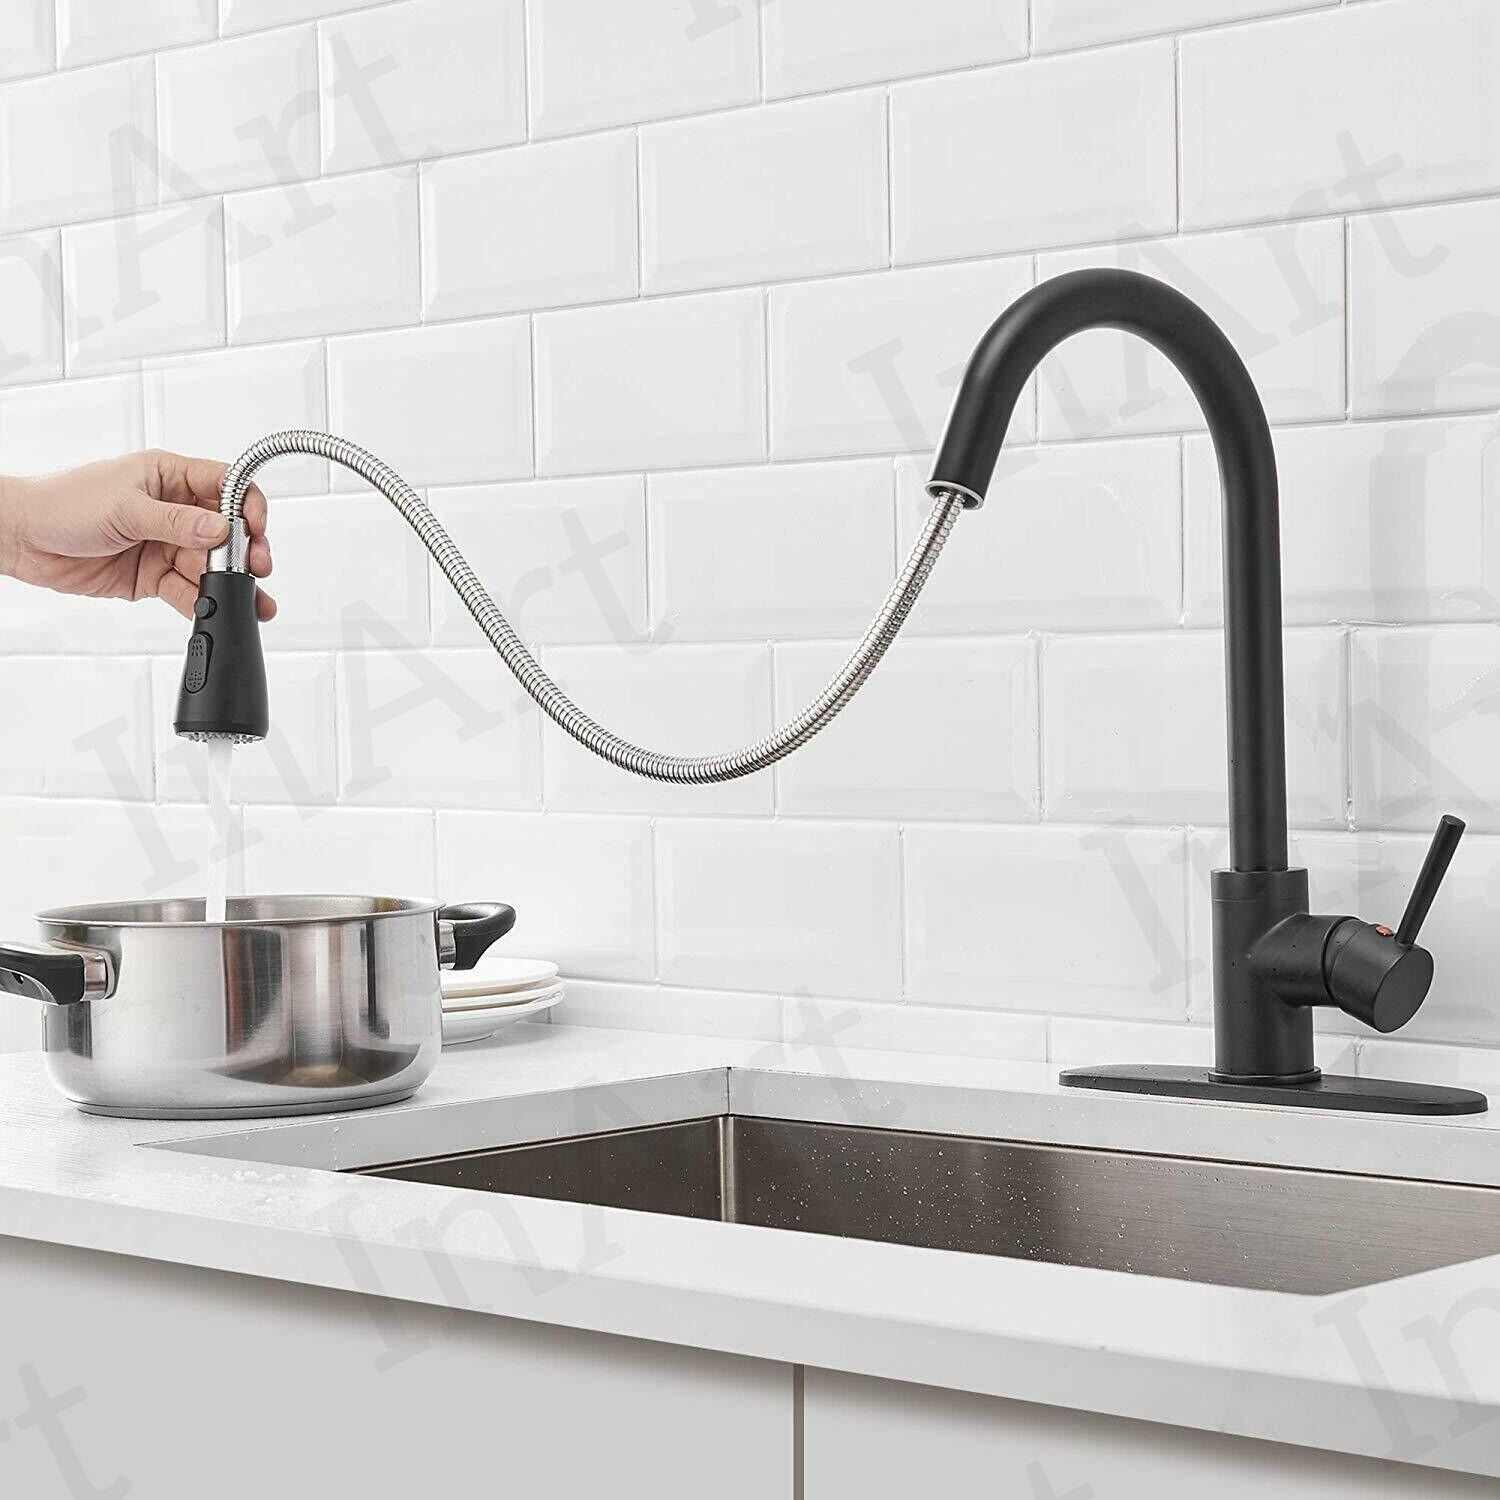 InArt Luxury Black Stainless Steel Kitchen Faucet with Pull-Down Spray - The Ultimate Single Lever Mixer for Modern Kitchens - InArt-Studio